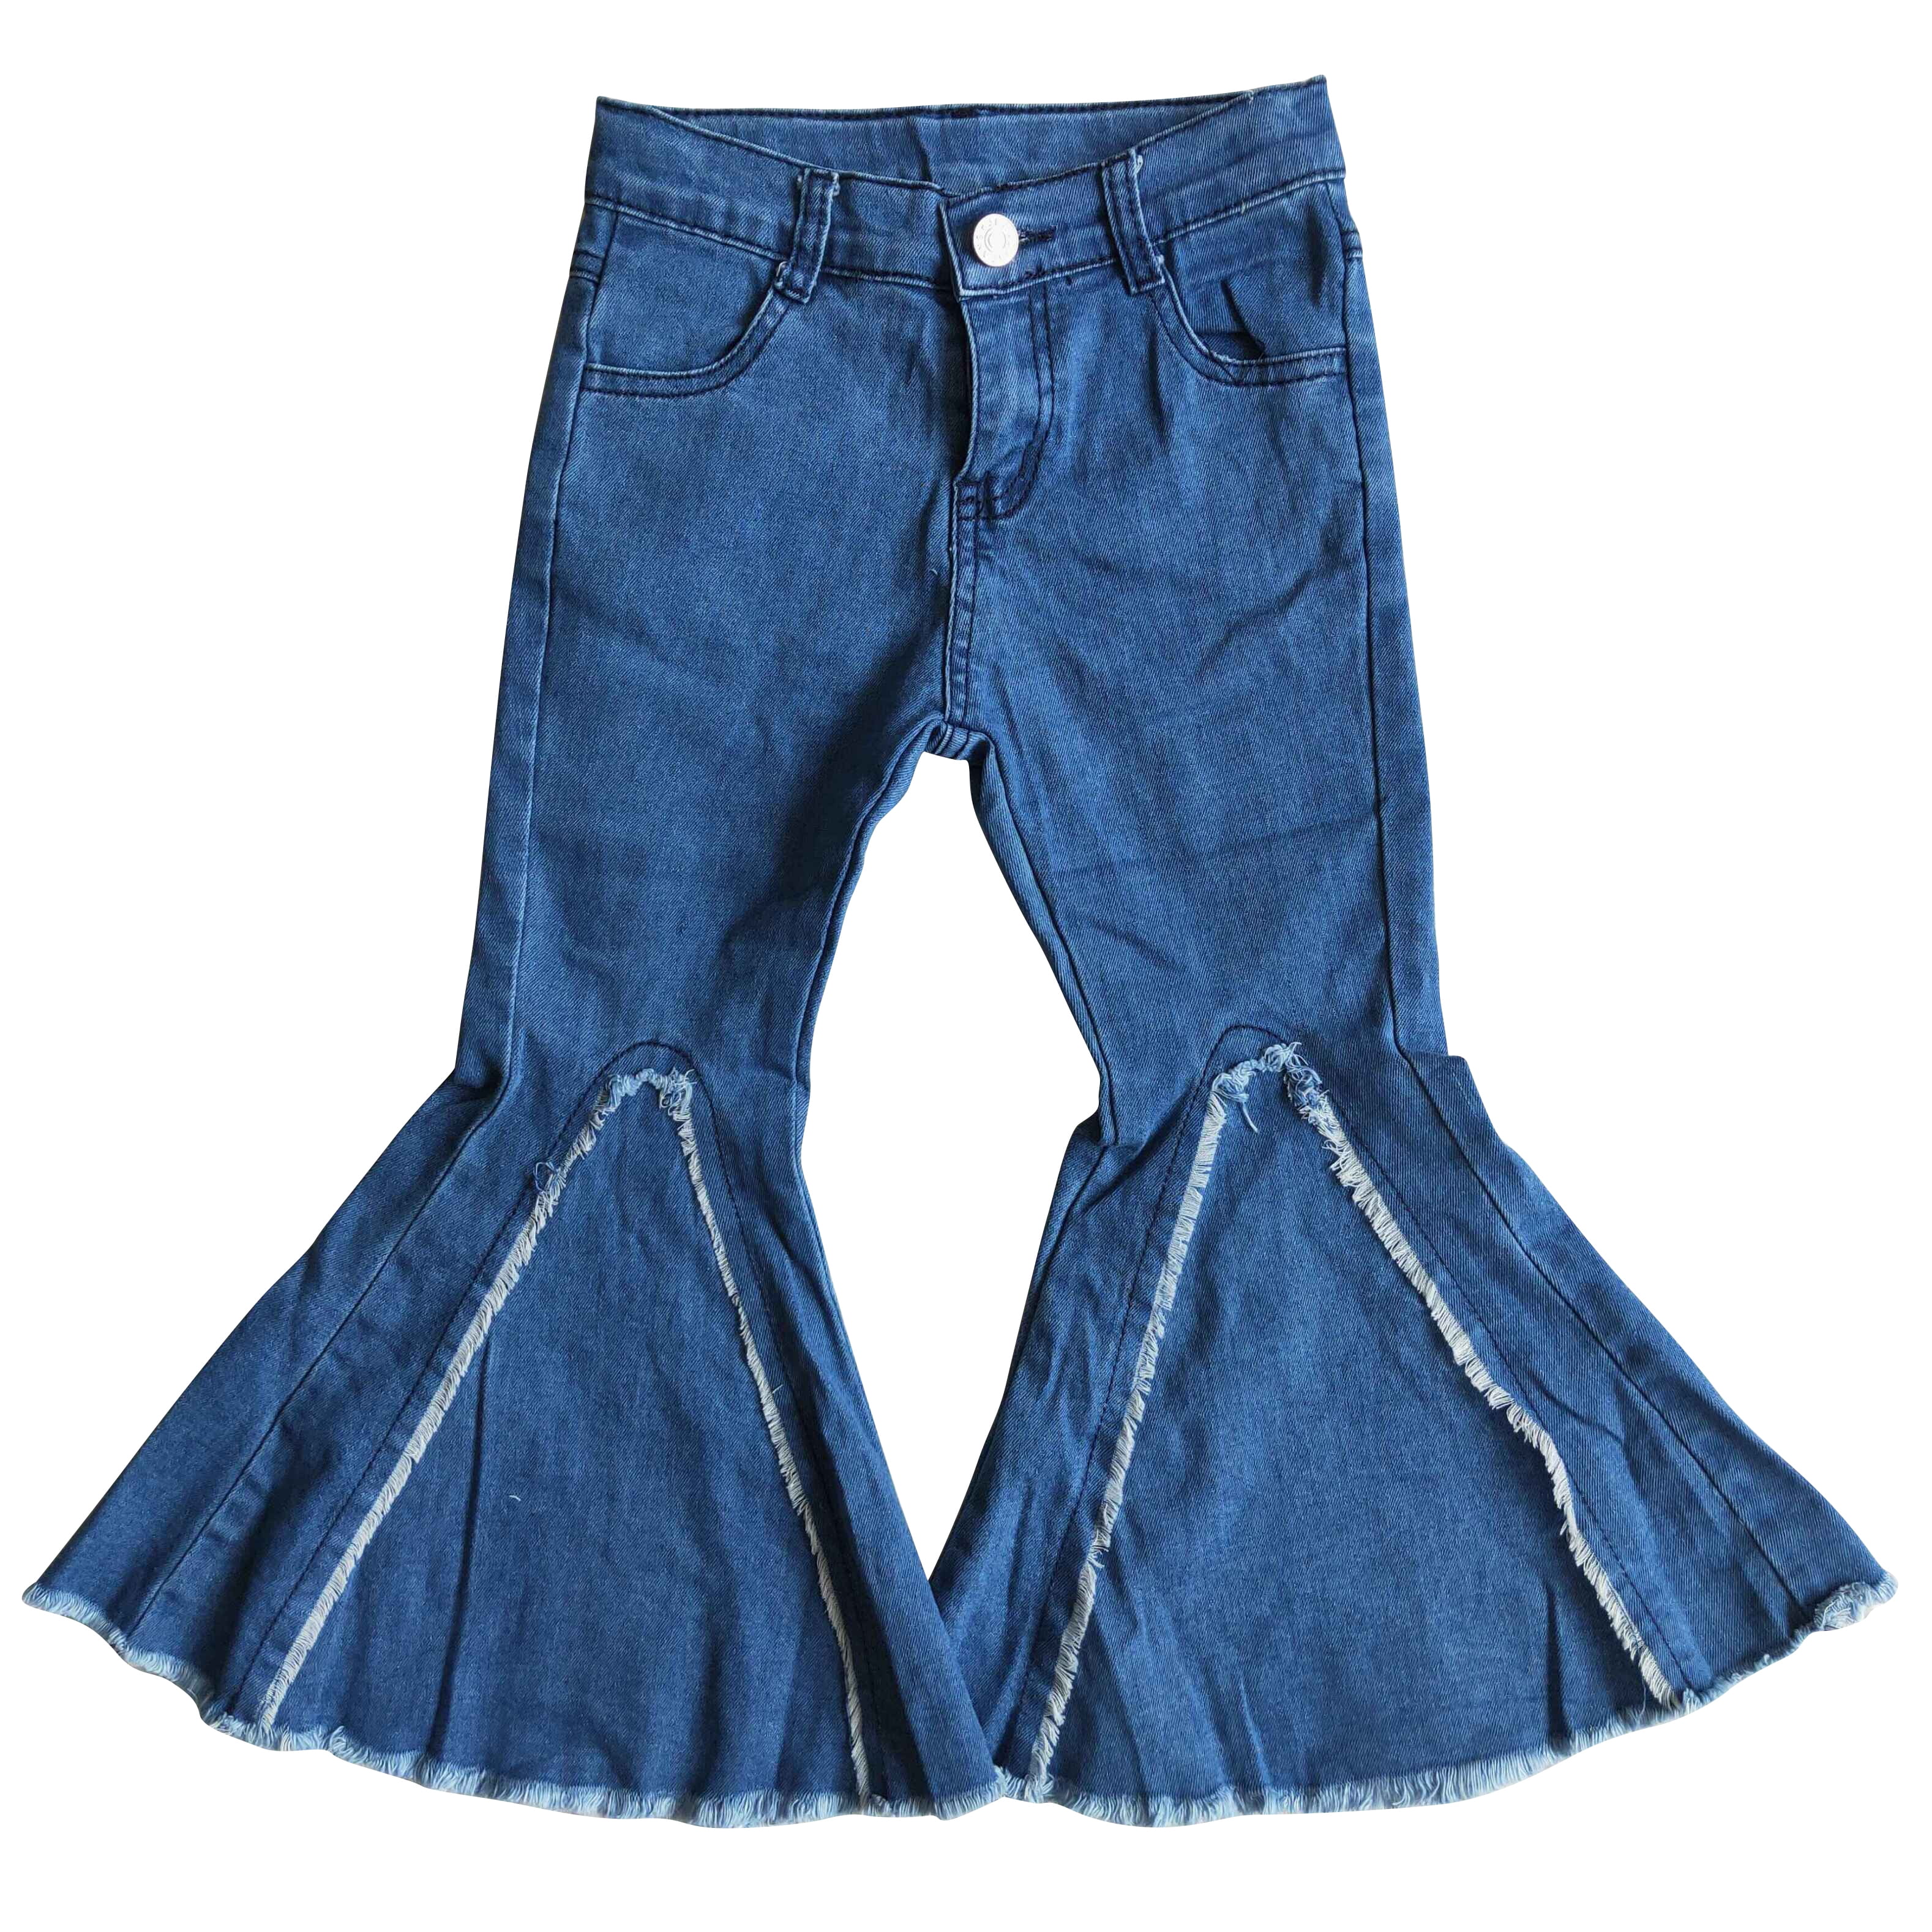 Boutique Wid Leg Flared Denim Pants Jeans Little Girls Jeans New Design  Stylish Bell Bottom Jeans For Kids Hot Sale Style Flare Jeans